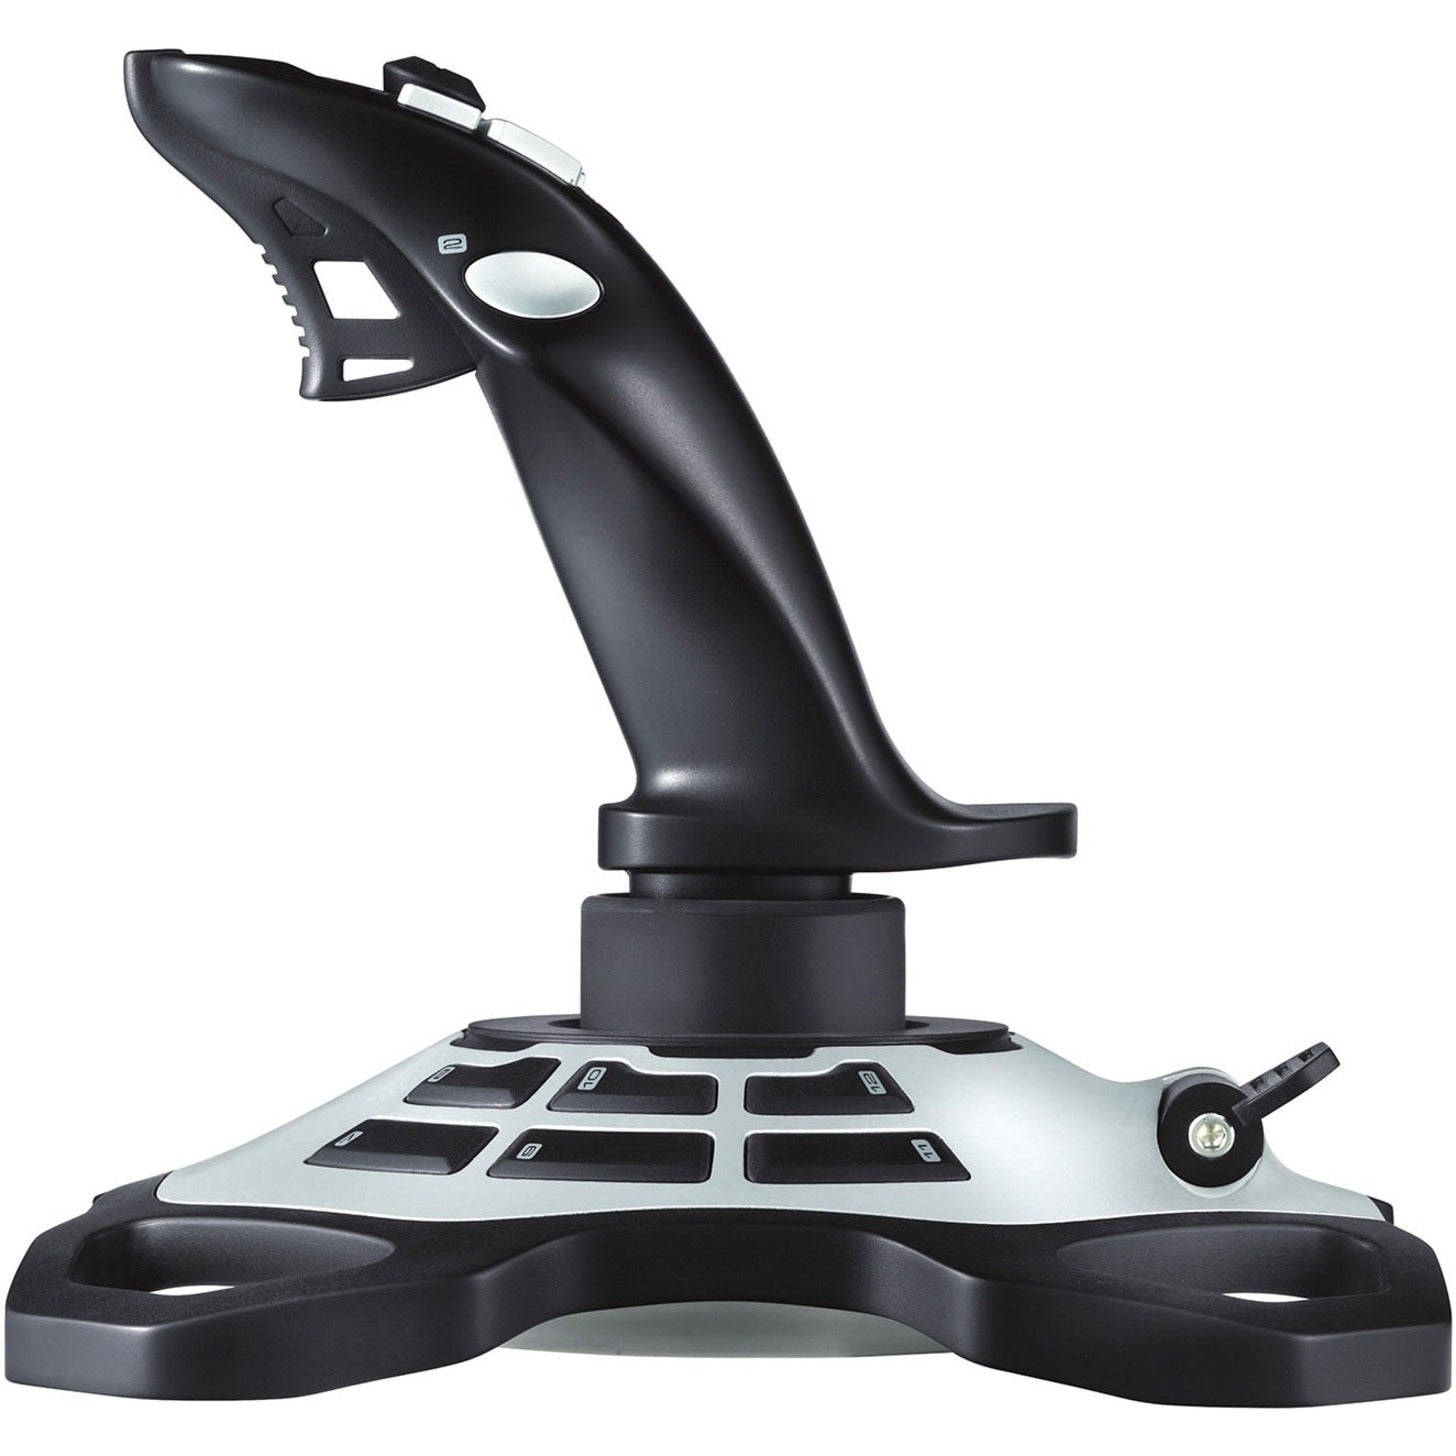 Logitech 963290-0403 Extreme 3D Pro Joystick, USB Cable, PC, Mac - Customize Buttons, Double Functionality, Quick Switching, Game Profiles